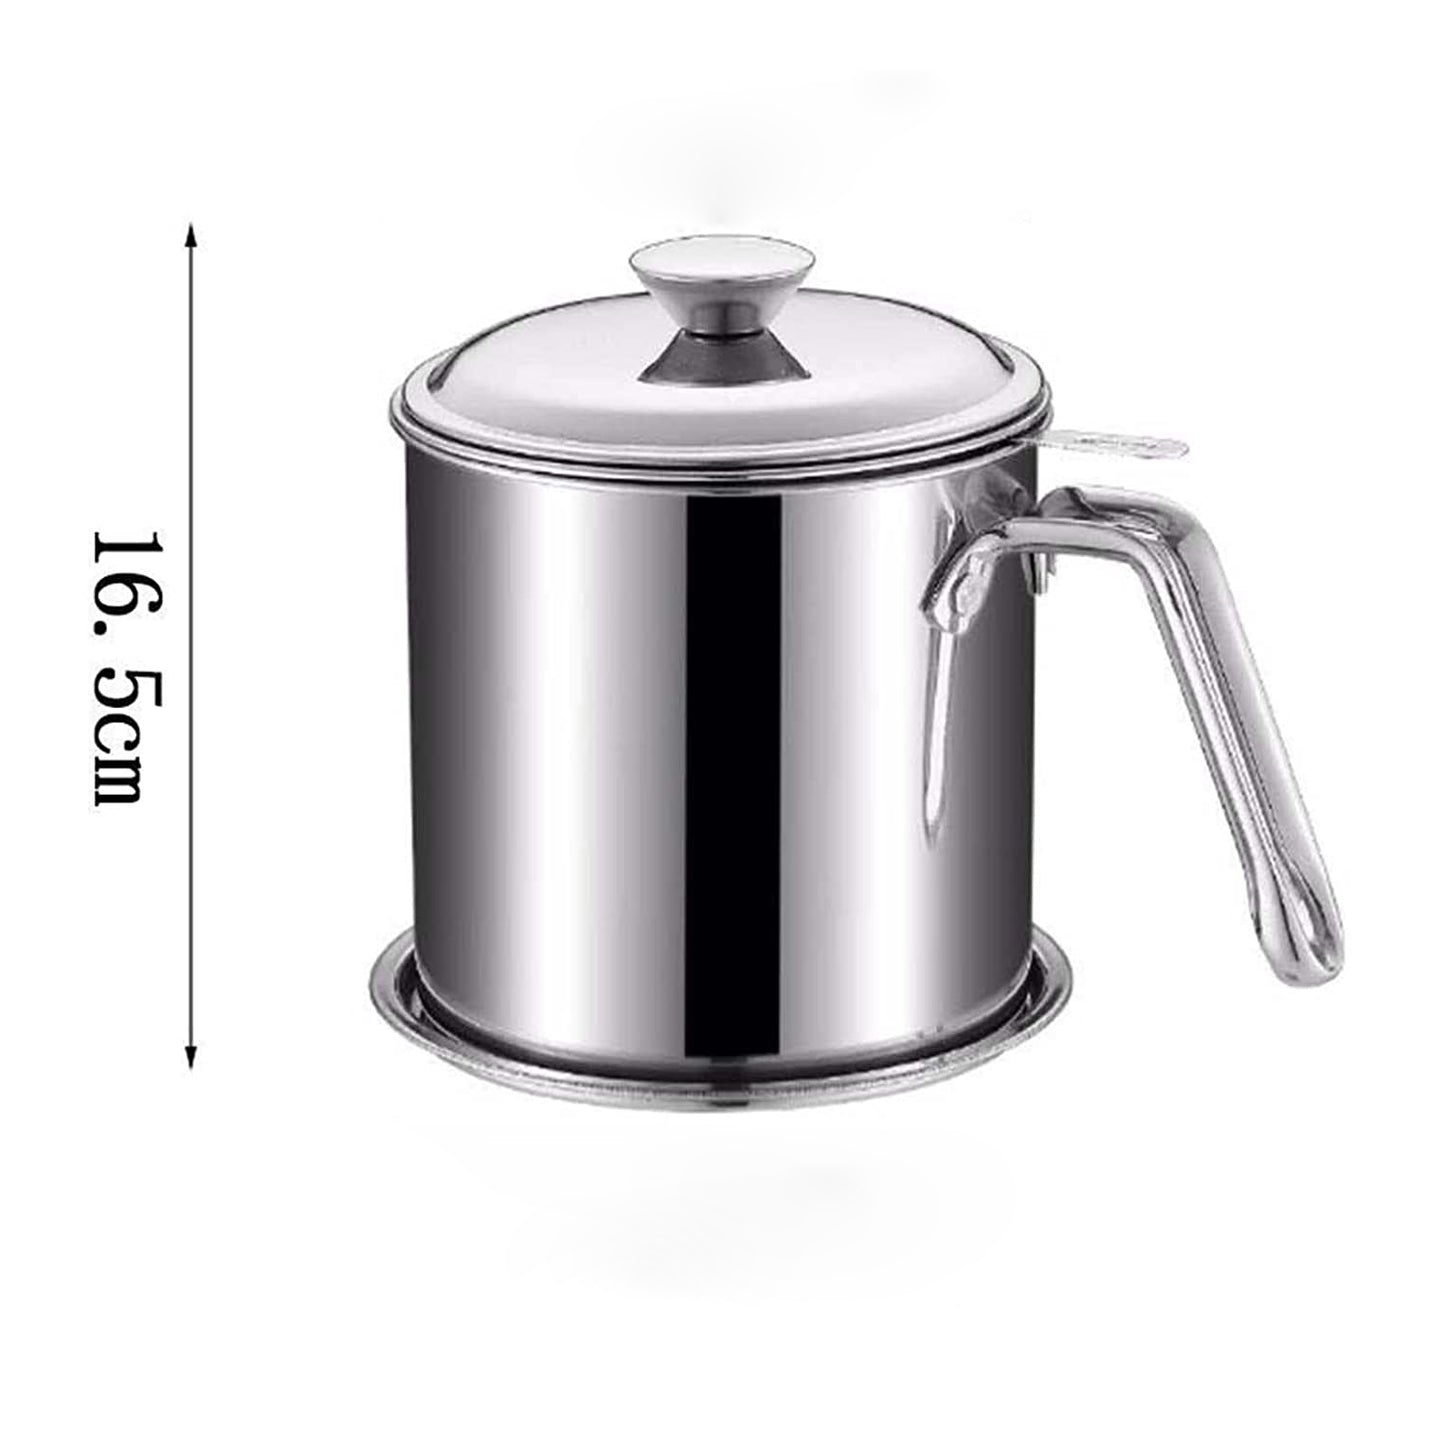 Stainless Steel Oil Strainer 6.5 inches